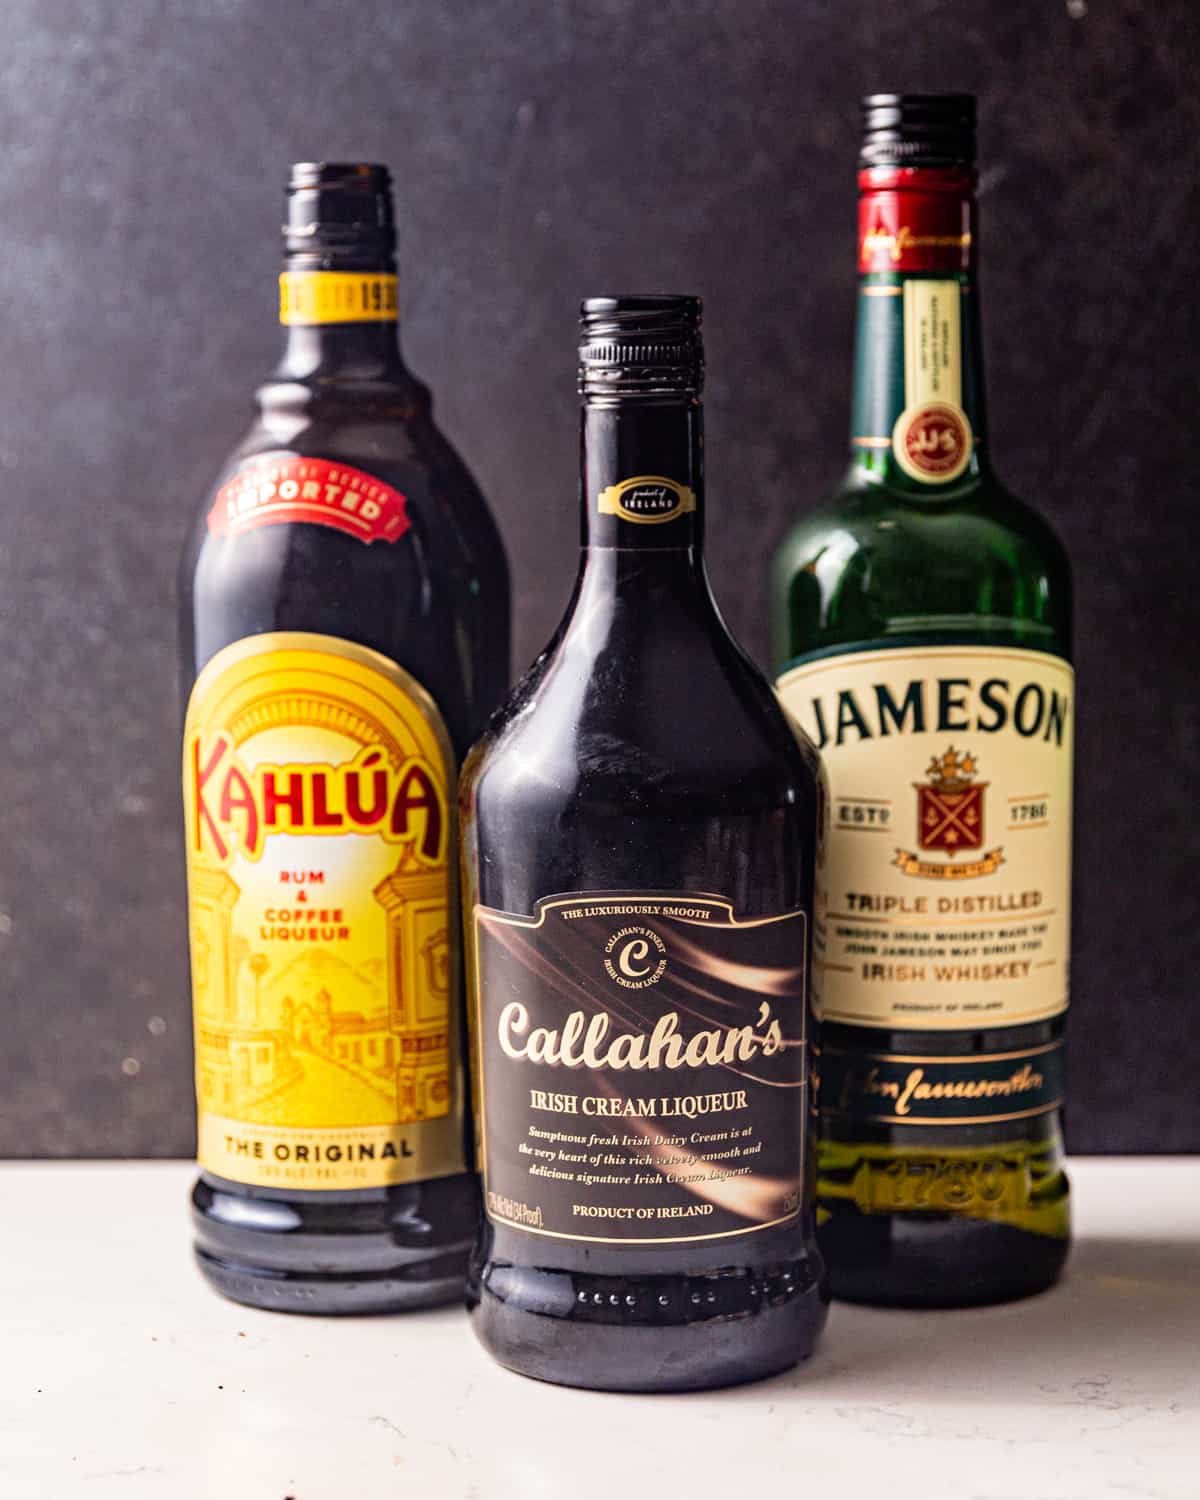 ingredients to make a duck fart shot - kahlua coffee liqueur, baileys irish cream, and whiskey.